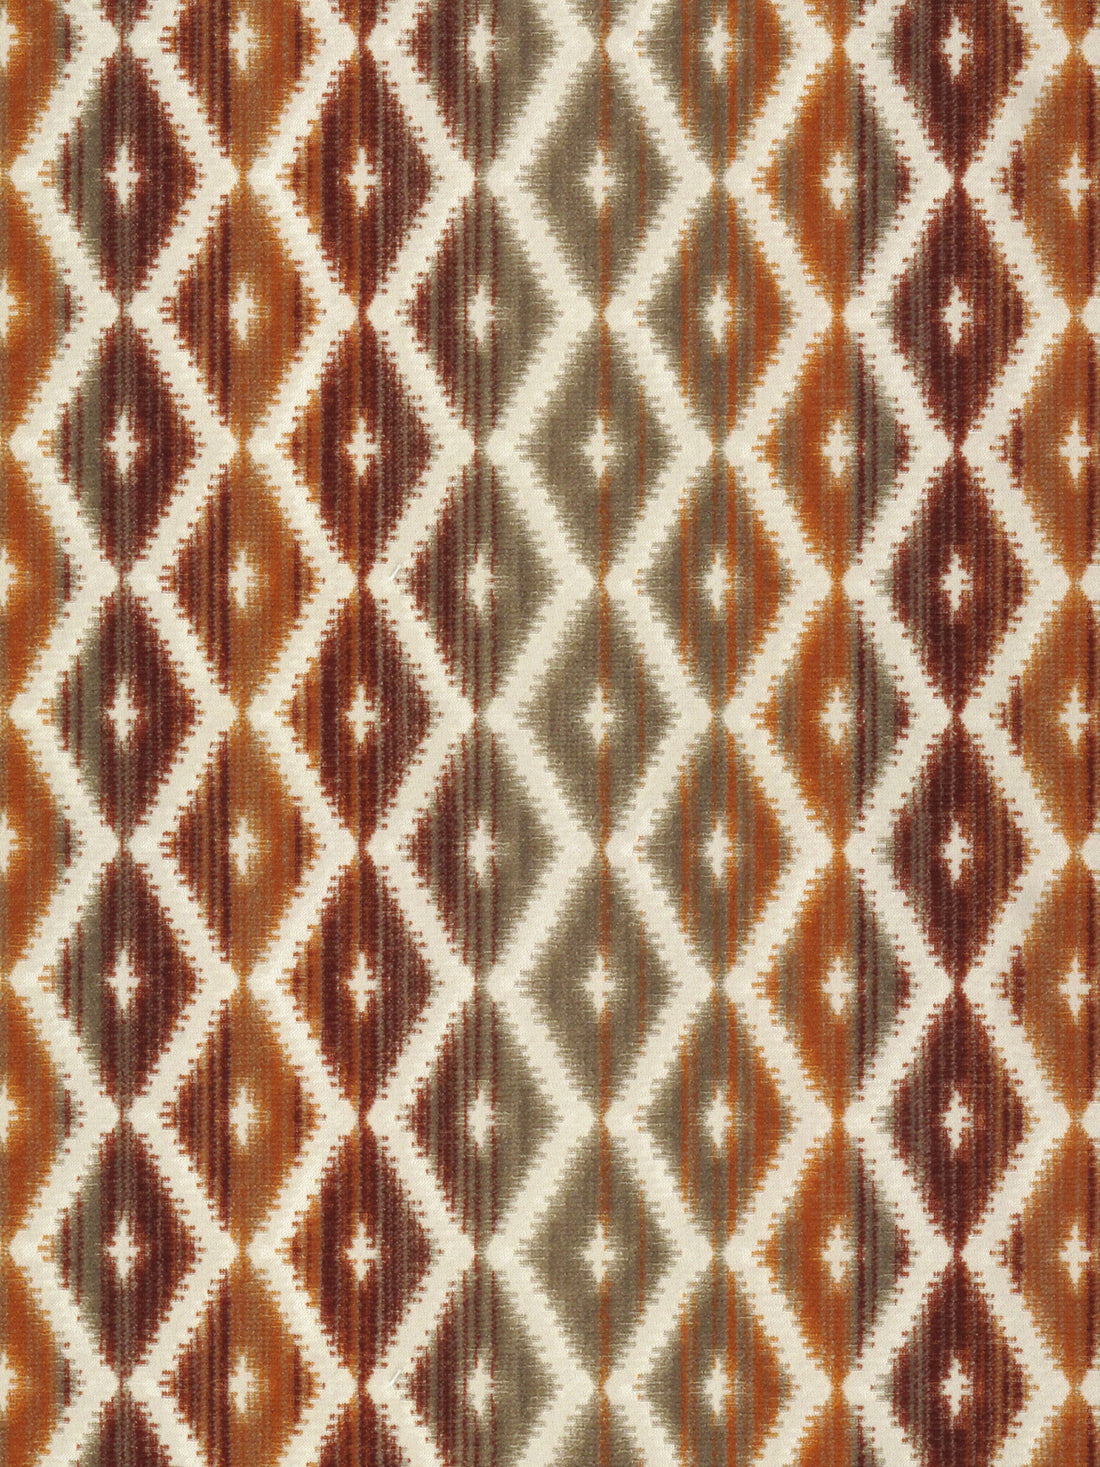 Diamantina fabric in brick color - pattern number SI 00071316 - by Scalamandre in the Old World Weavers collection